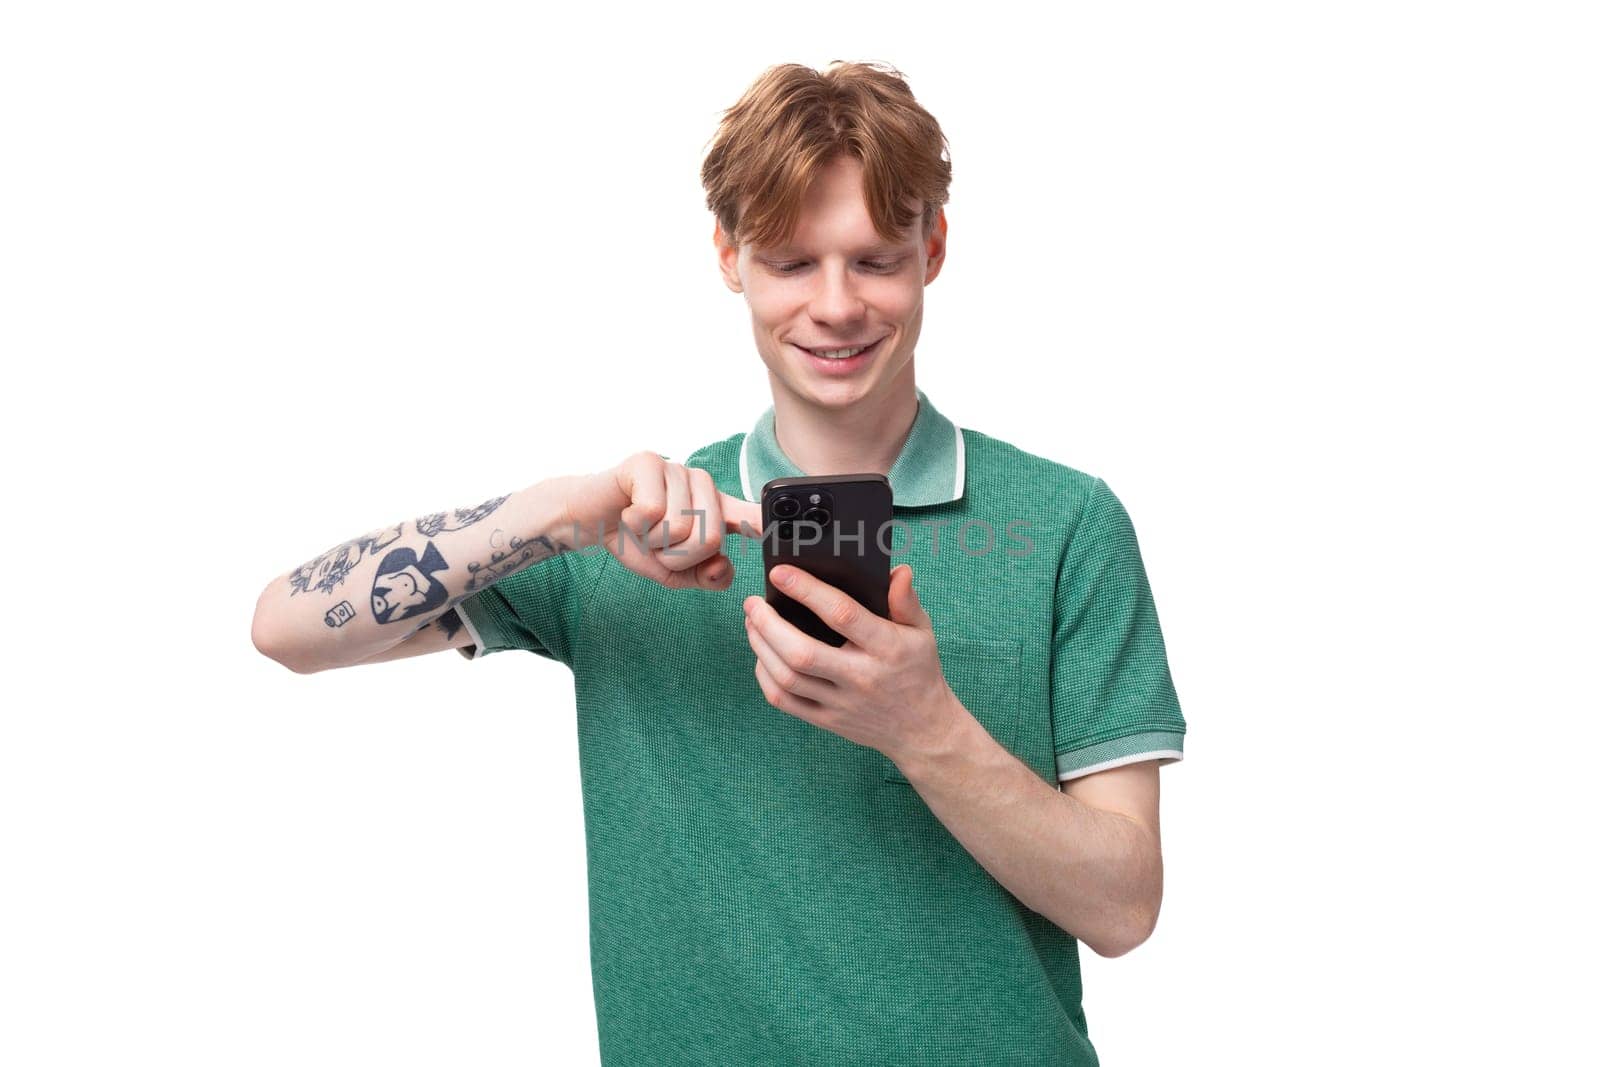 young caucasian man with red hair dressed in a green t-shirt shoots a video on the phone.